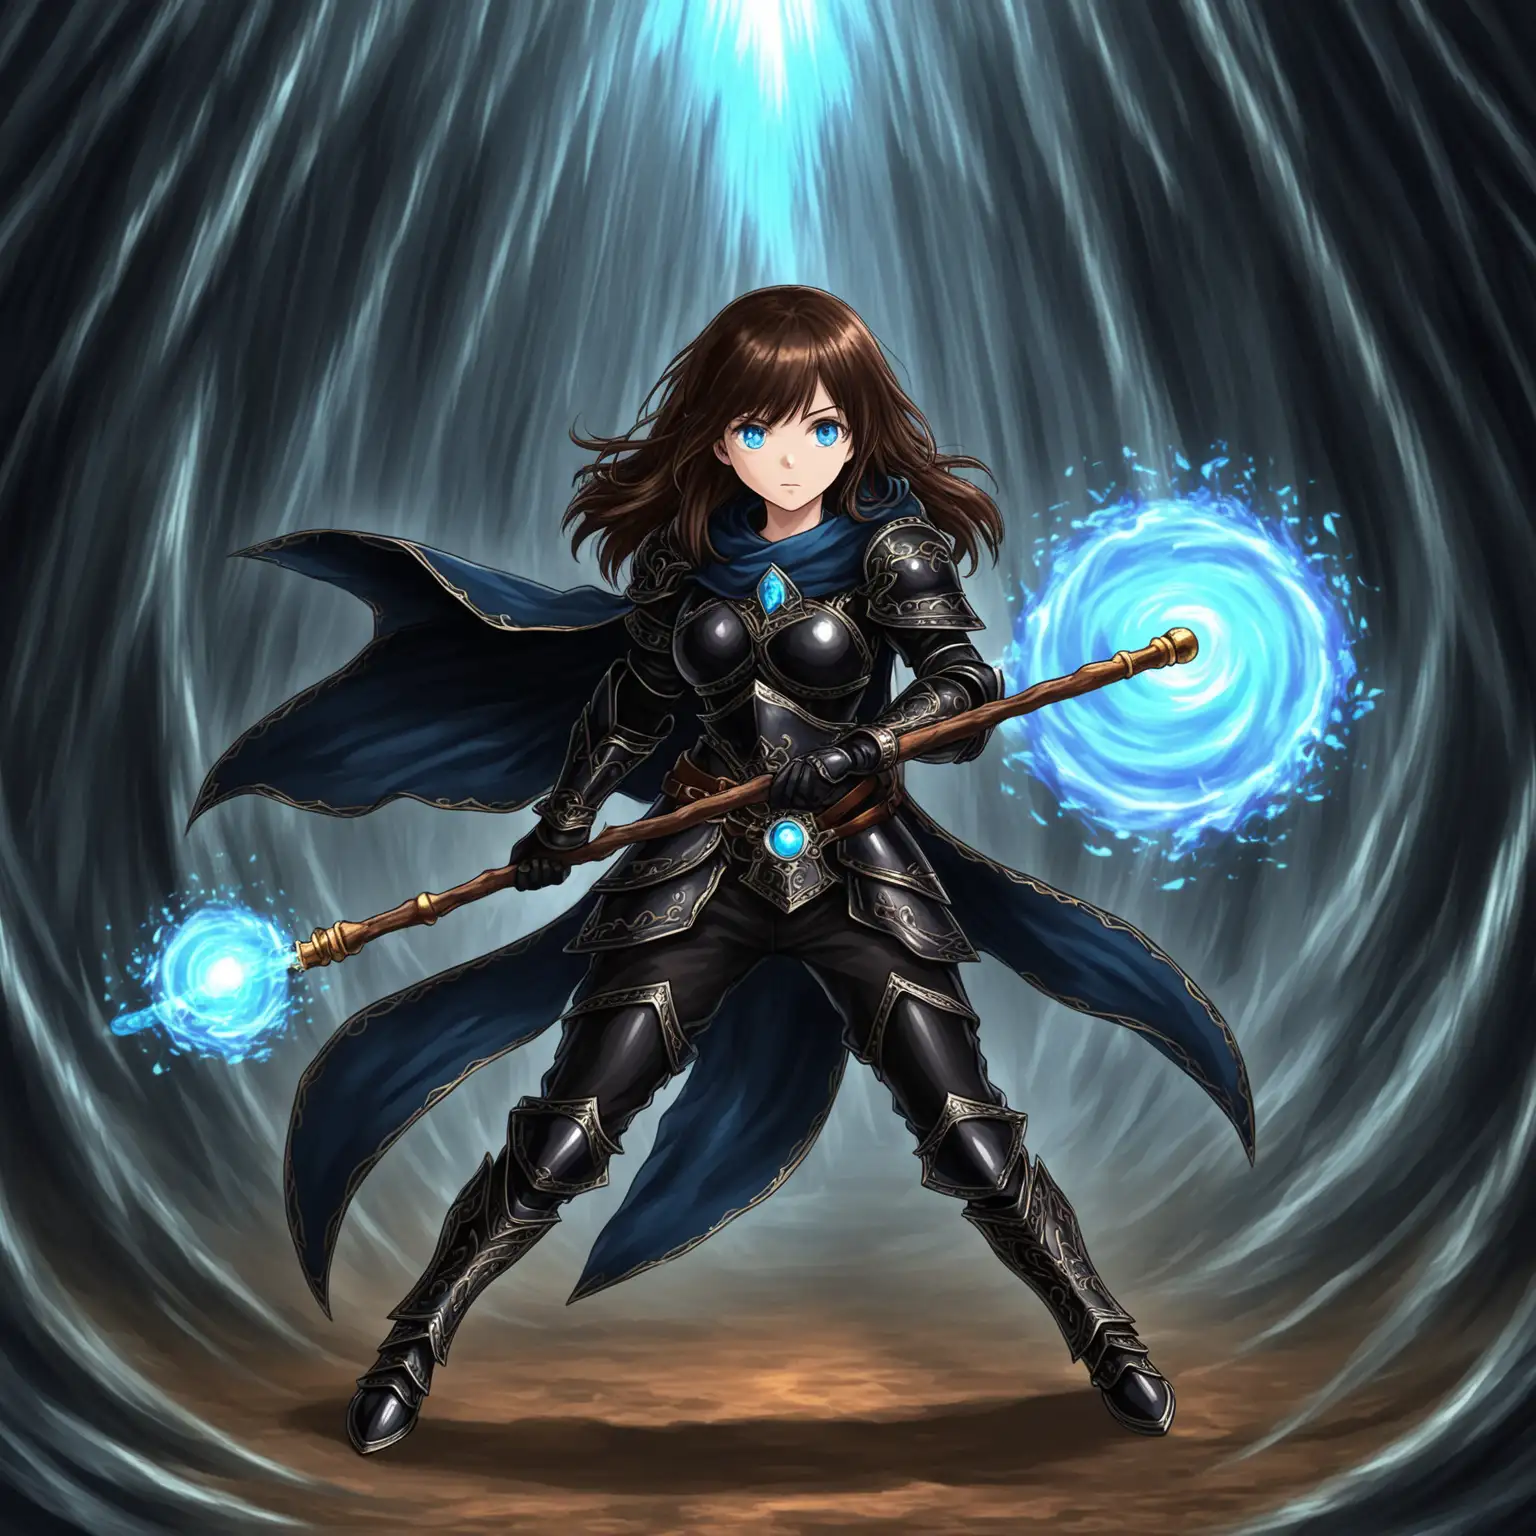 Young Girl in Adventurers Armor with Magic Staff and Aura